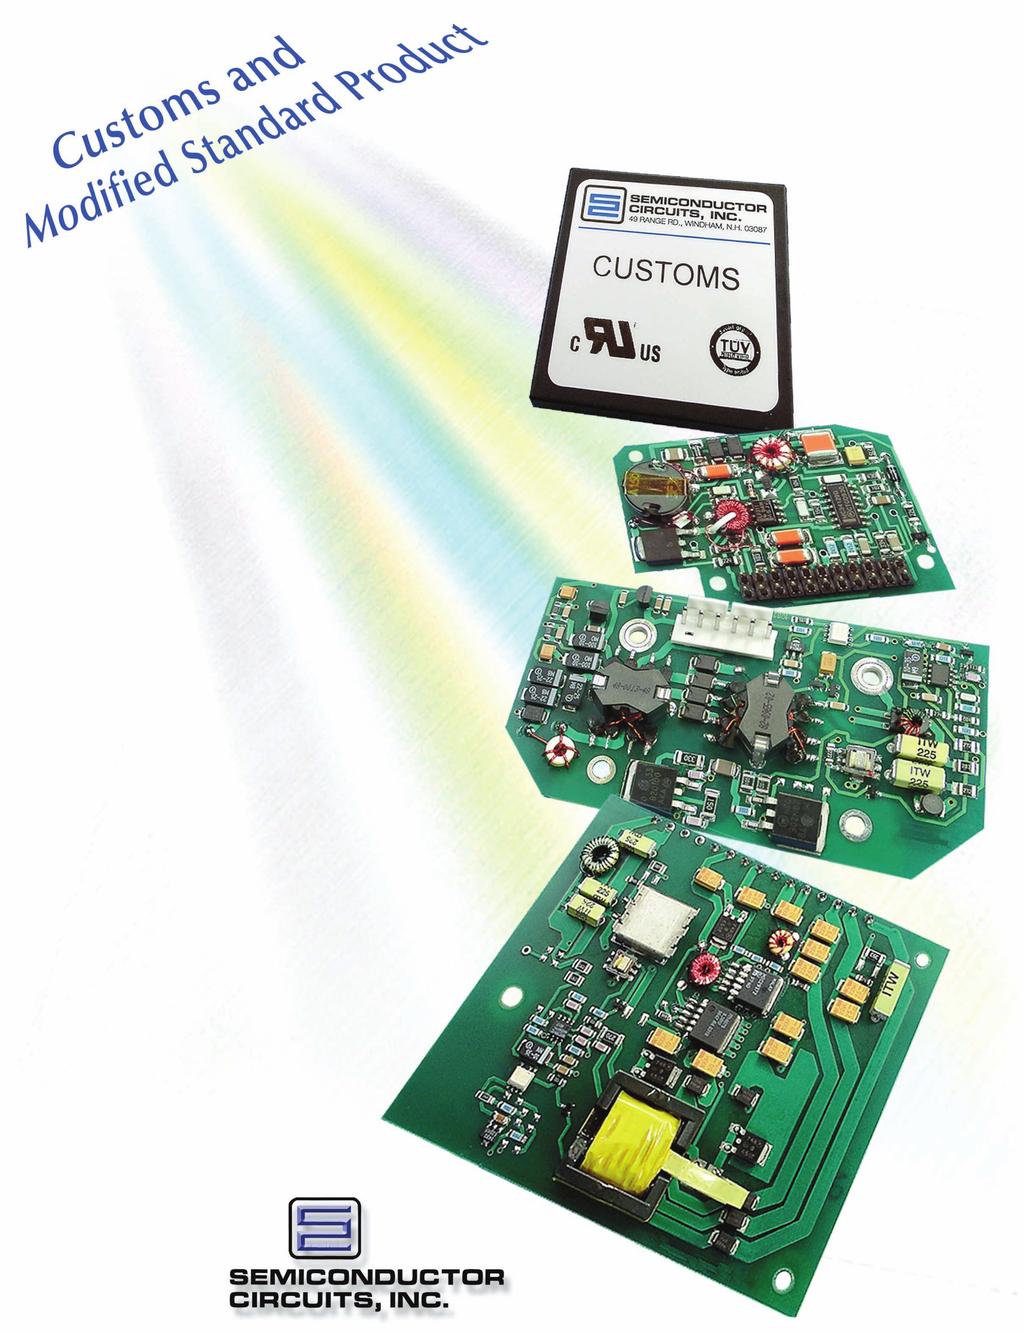 Specials and Custom Products have been our hallmark for over 40 years Semiconductor Circuits, Inc.